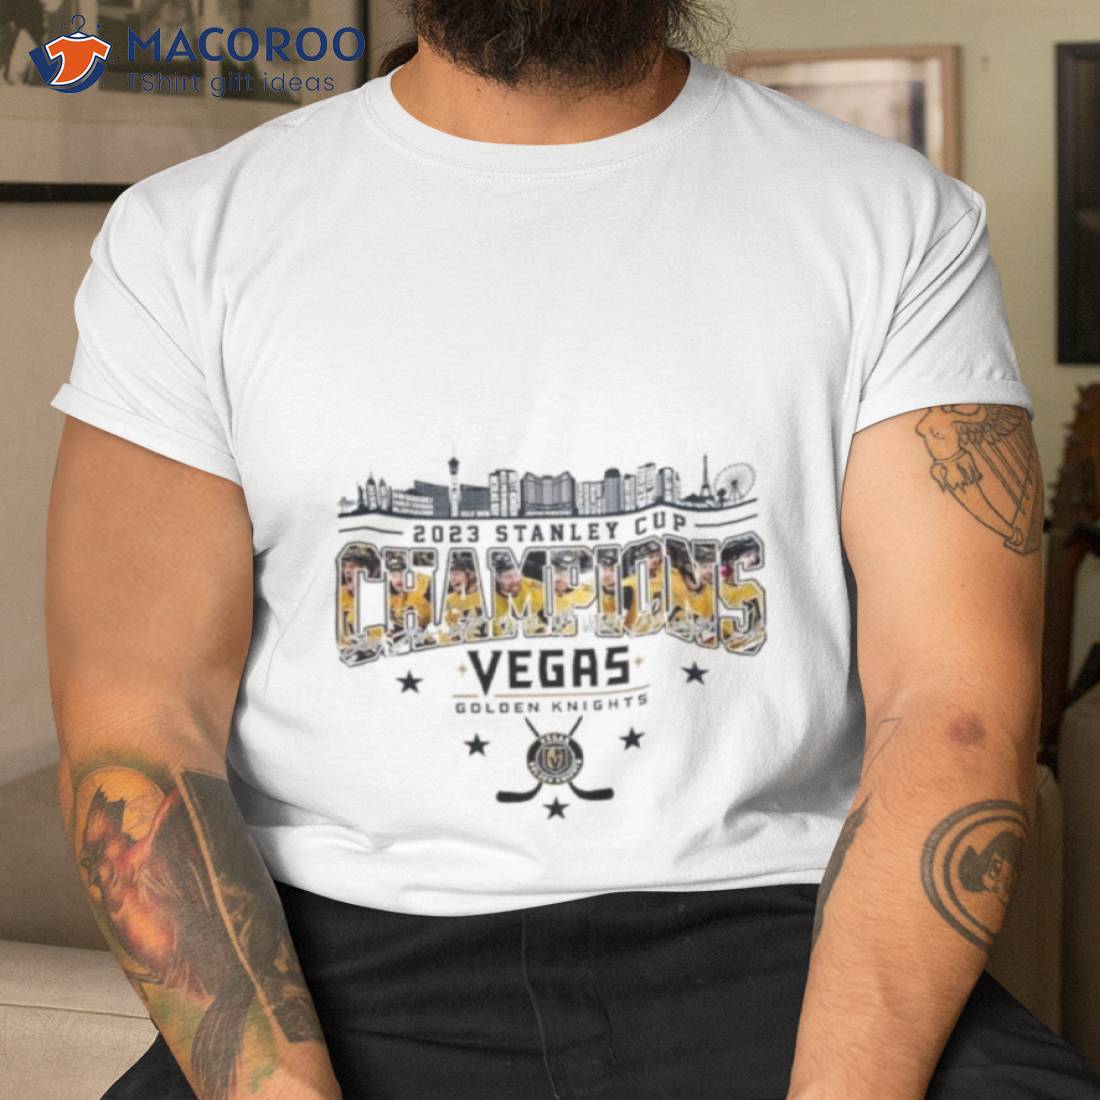 https://images.macoroo.com/wp-content/uploads/2023/06/2023-stanley-cup-champions-vegas-golden-knights-nhl-team-white-design-signatures-shirt-tshirt.jpg